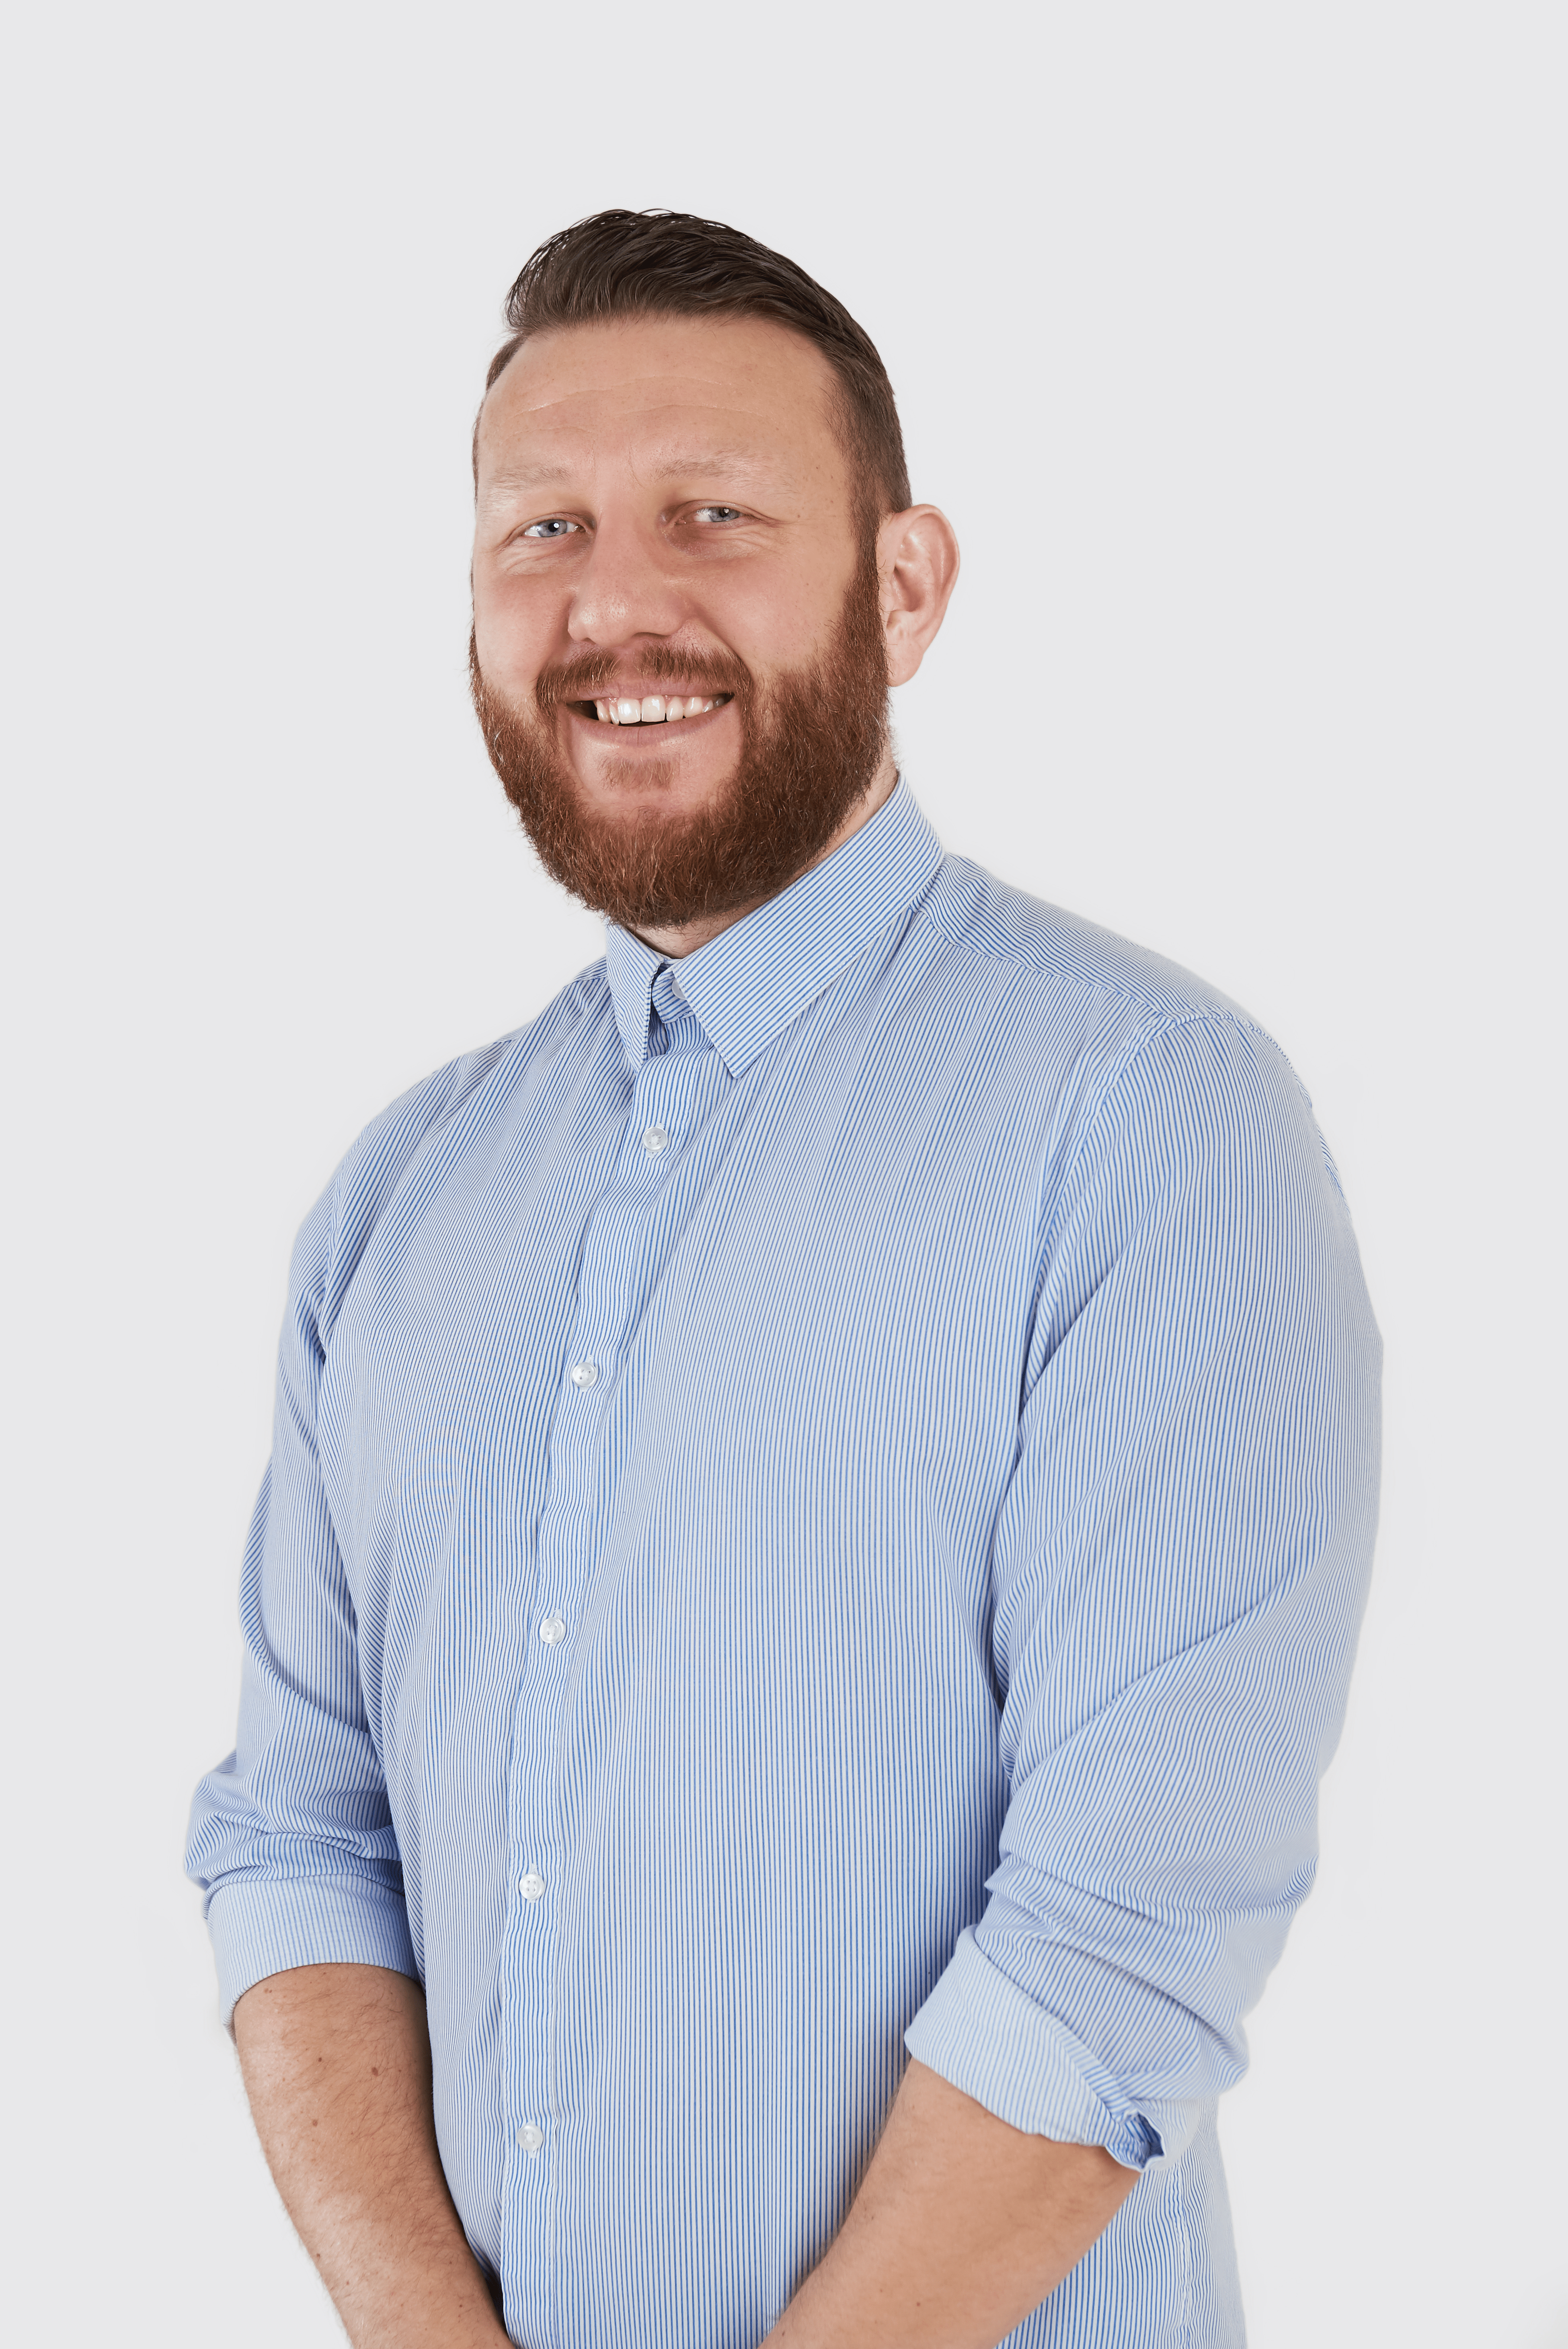 Rob Mole new Customer Success Manager at Clekt standing in blue shirt